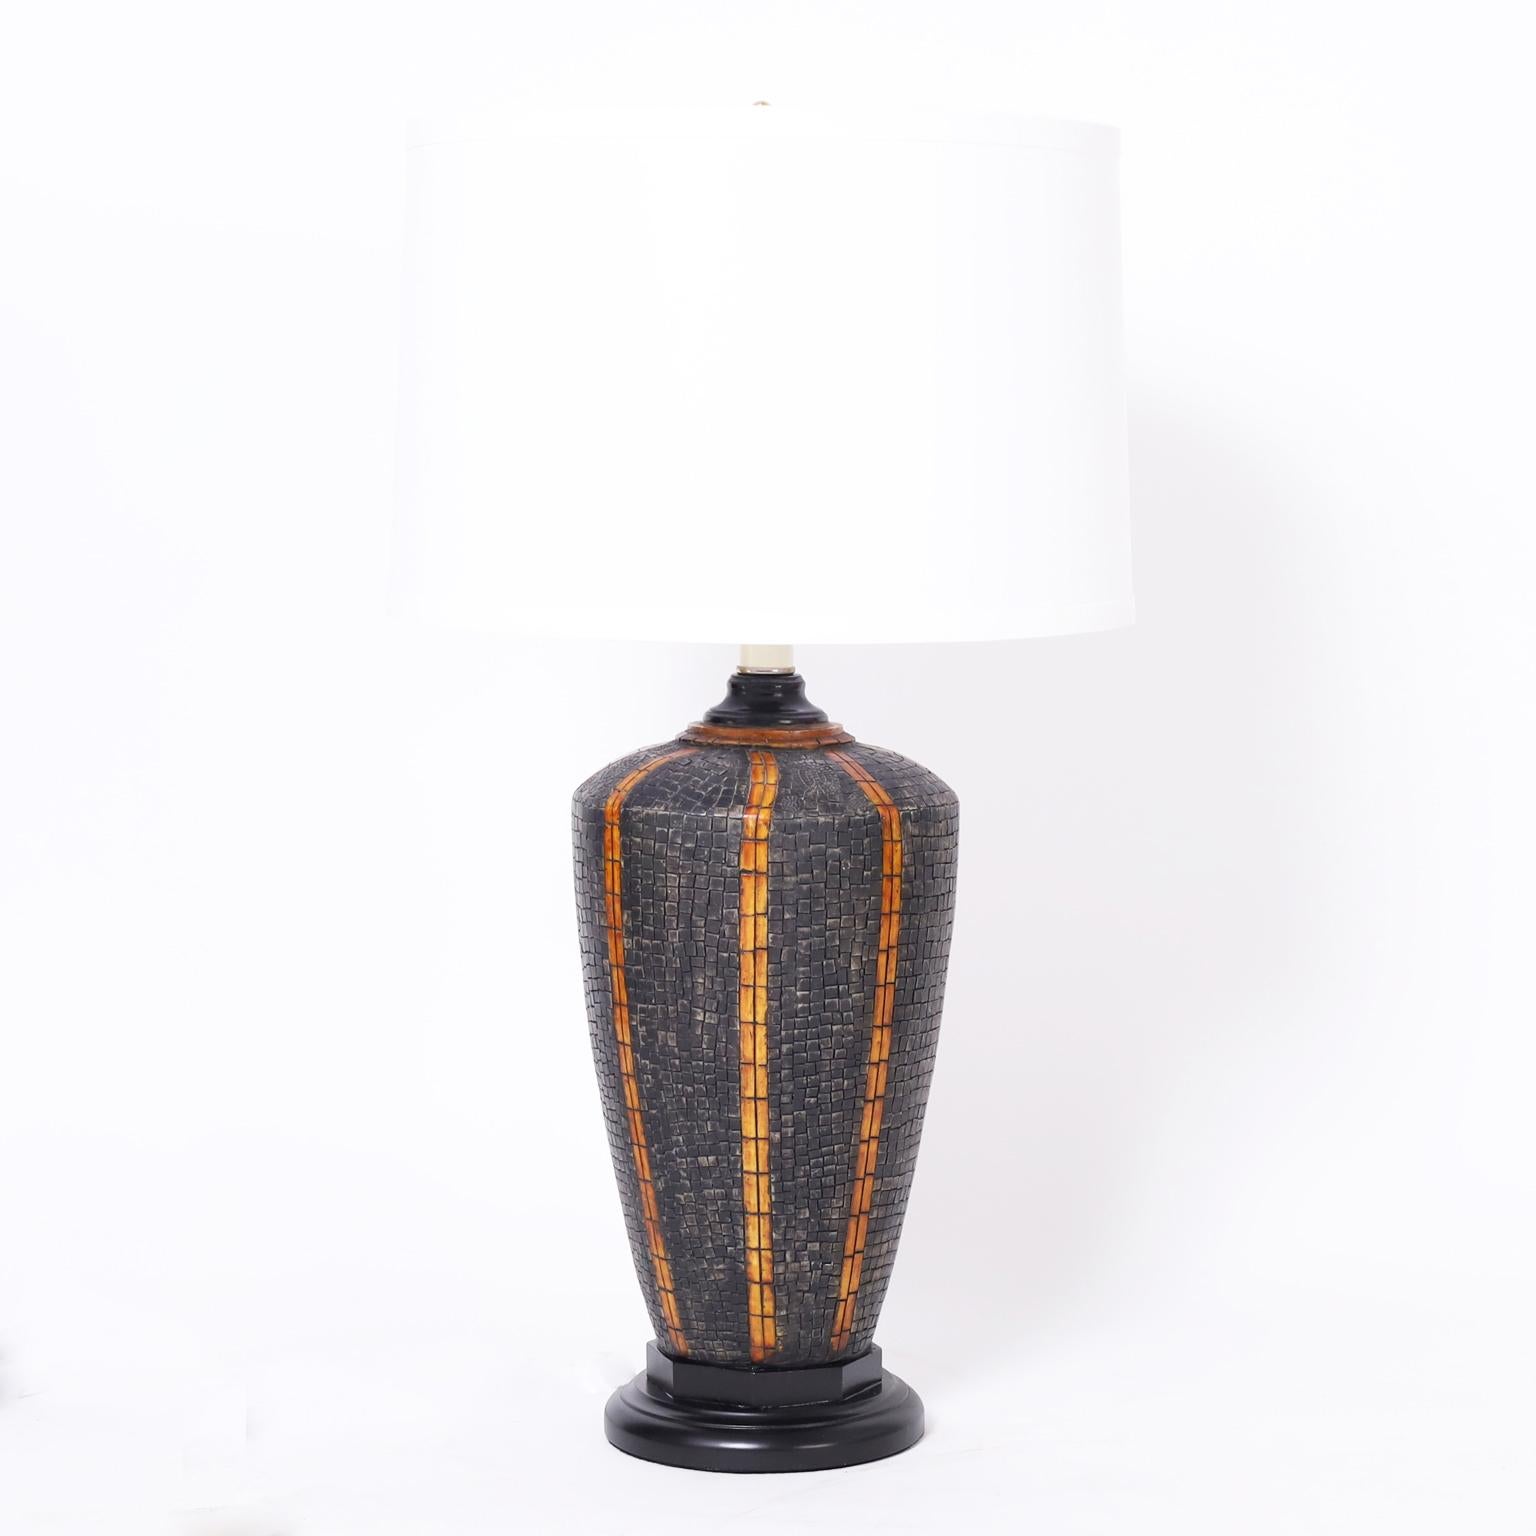 Impressive pair of mid century Italian table lamps crafted with a steer horn and dyed bone mosaic on a classic form and presented on black lacquer wood bases.